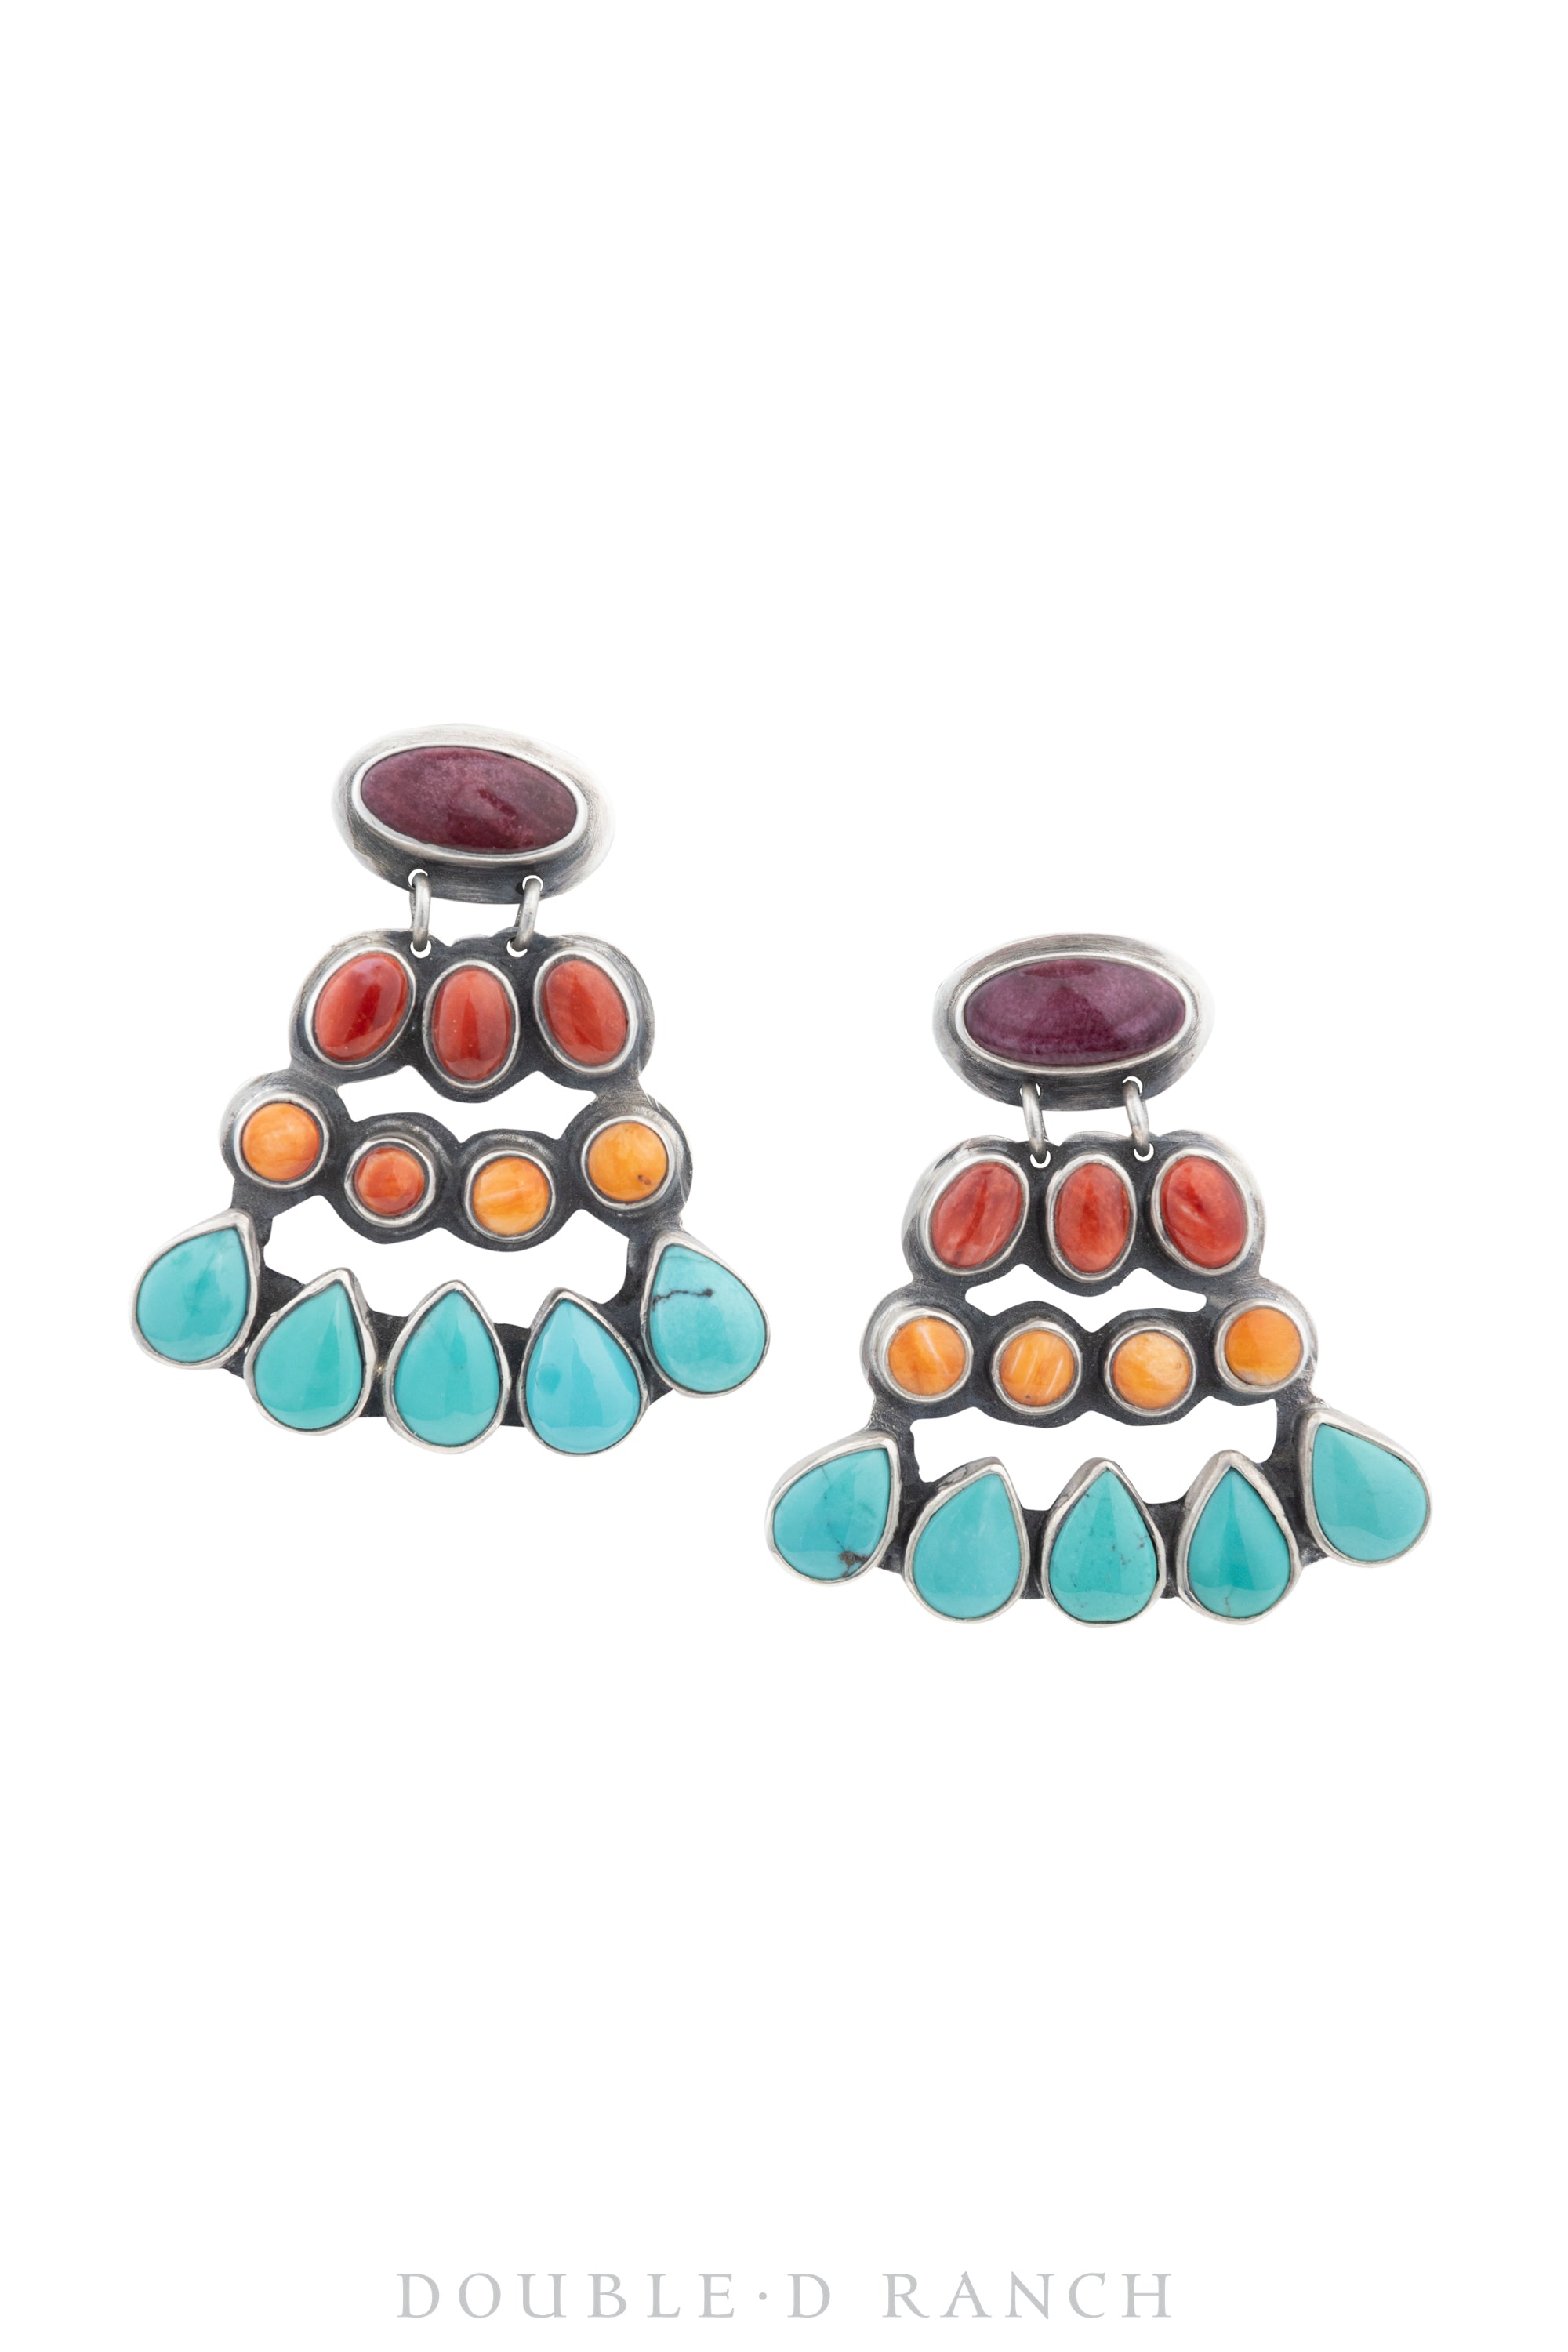 Earrings, Cluster, Turquoise, Orange, Coral & Purple Spiney, Hallmark, Contemporary, 1574